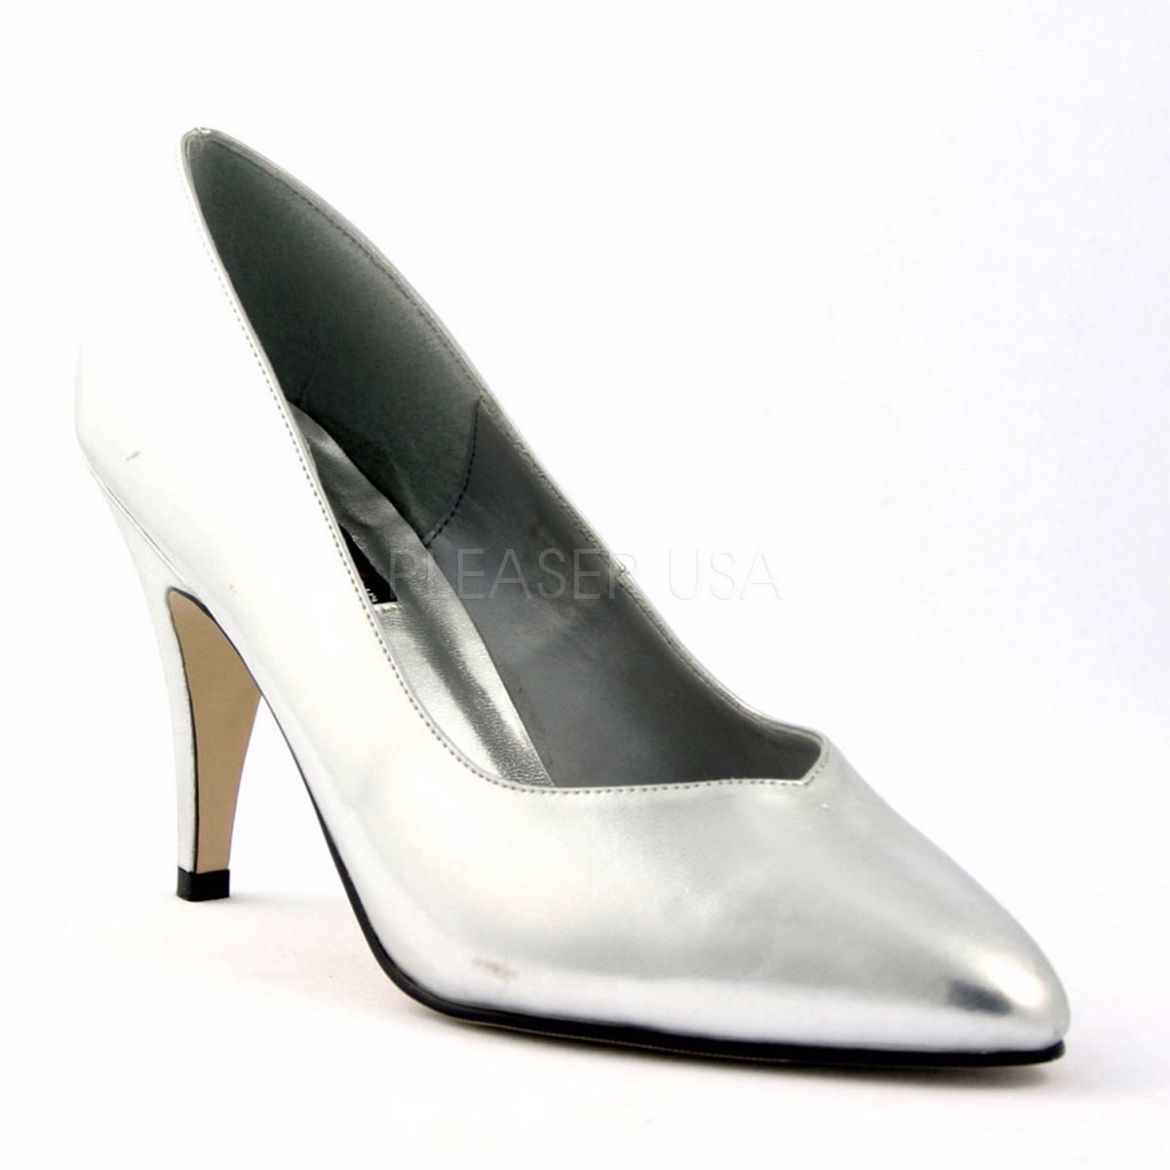 Product image of Pleaser DREAM-420W Silver Faux Leather 4 inch (10.2 cm) Heel Pump